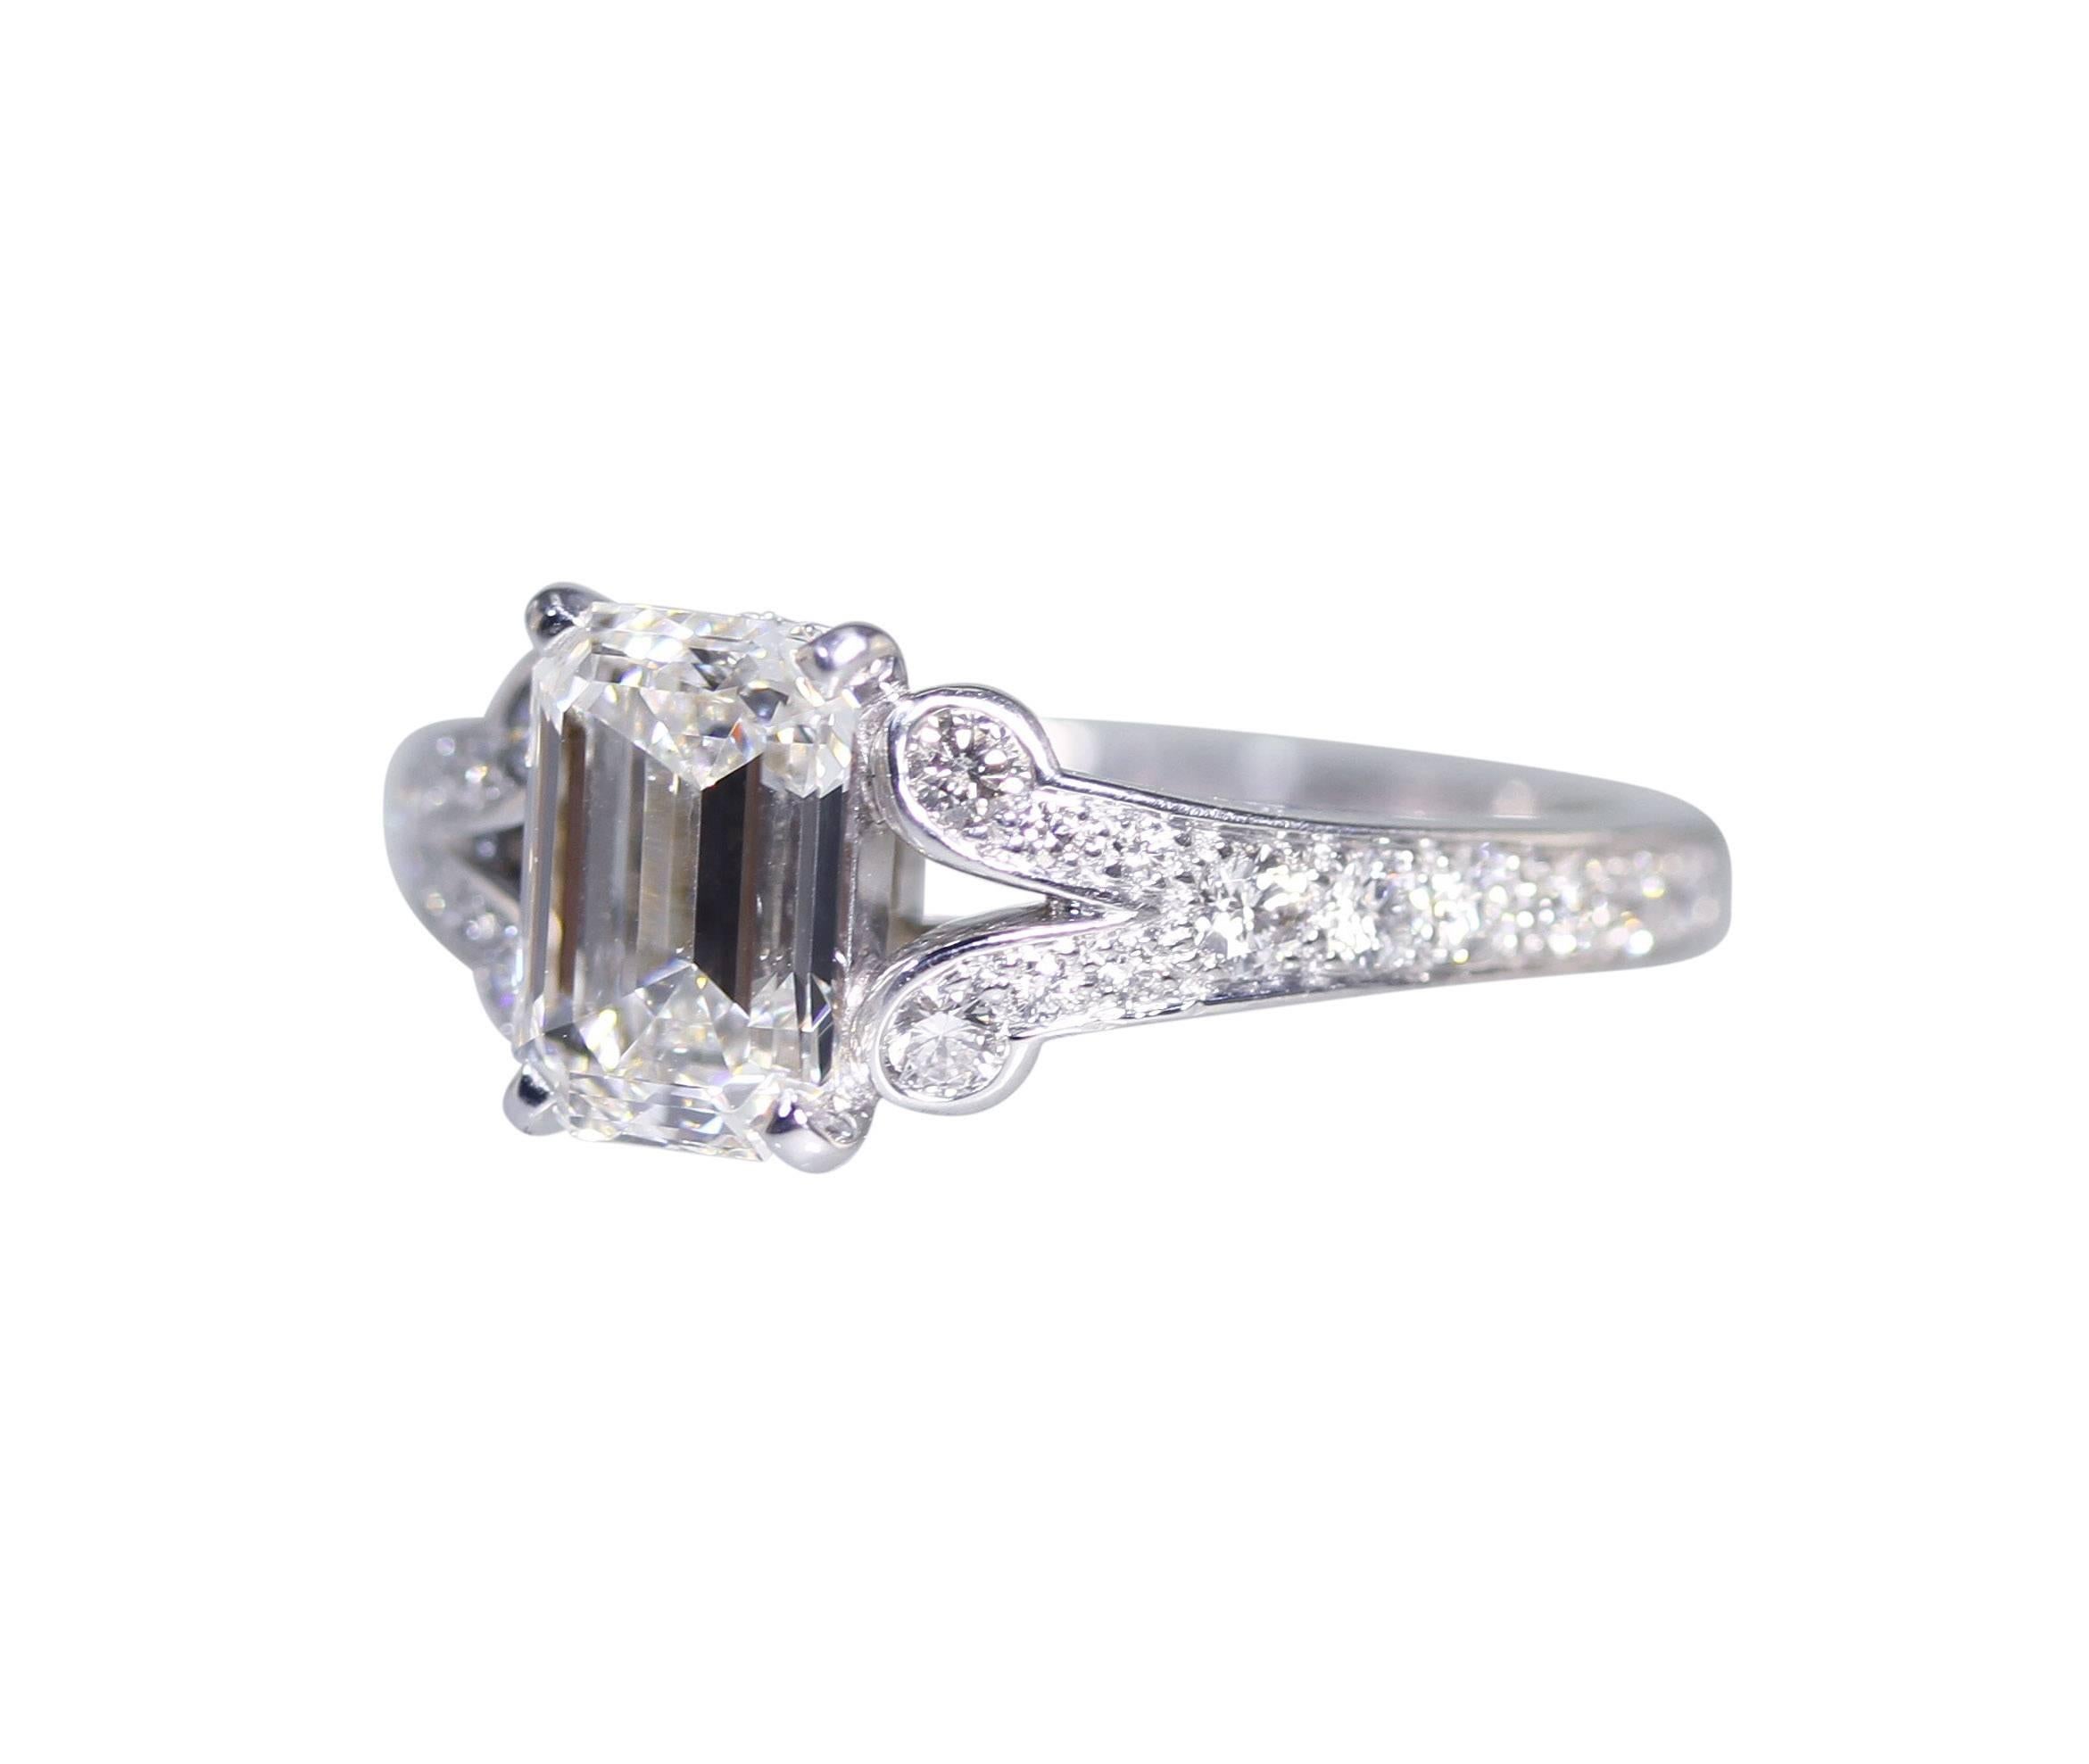 A platinum and diamond ring by Cartier, set in the center with an emerald-cut diamond weighing 1.55 carats, flanked by 24 round diamonds weighing approximately 0.50 carat, gross weight 5.3 grams, measuring 1/4 by 3/4 by 7/8 inch, size 4 with sizing